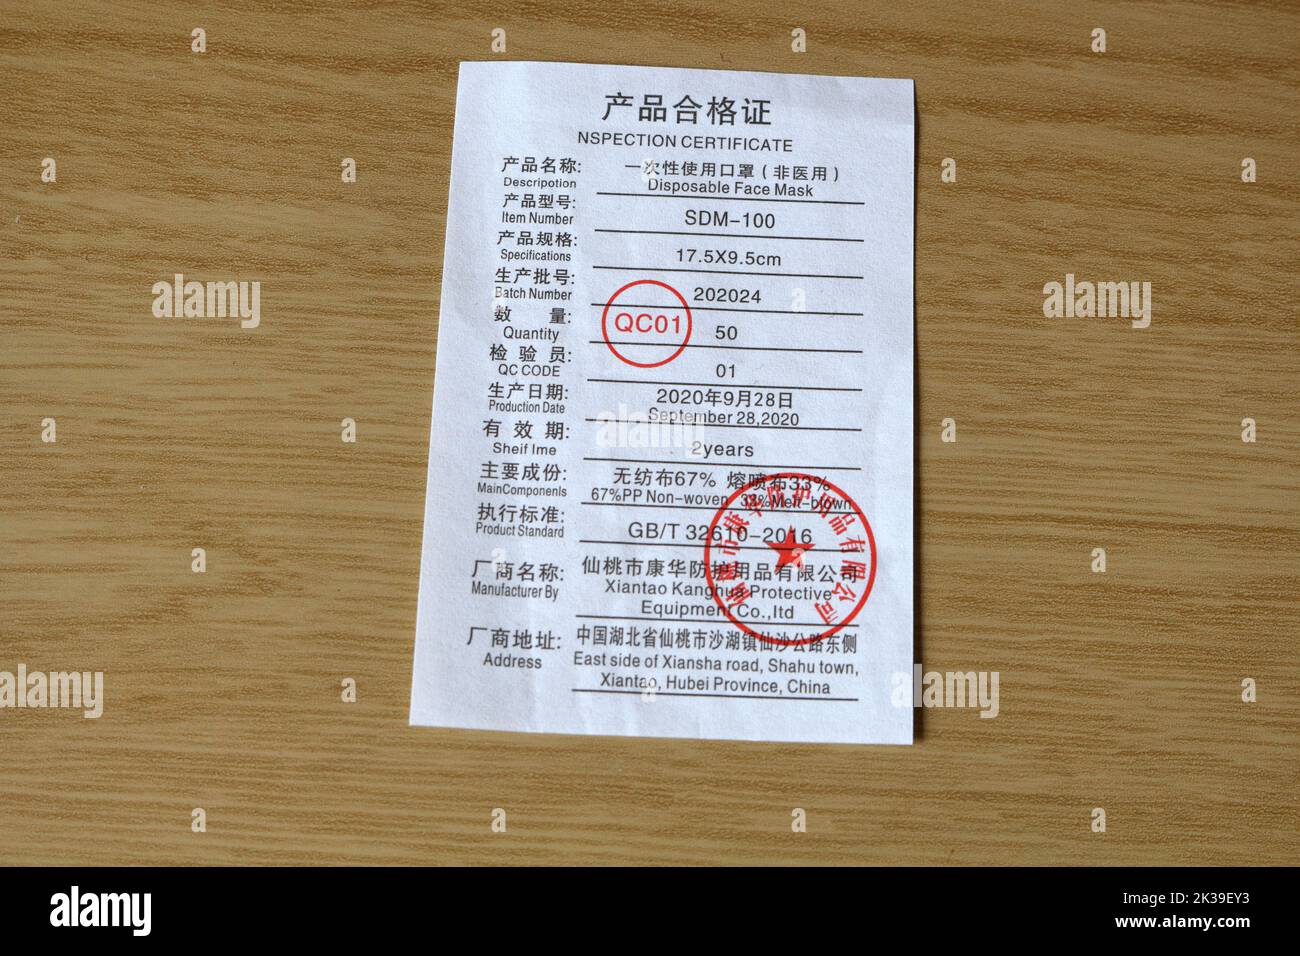 Chinese quality control inspection certificate Stock Photo